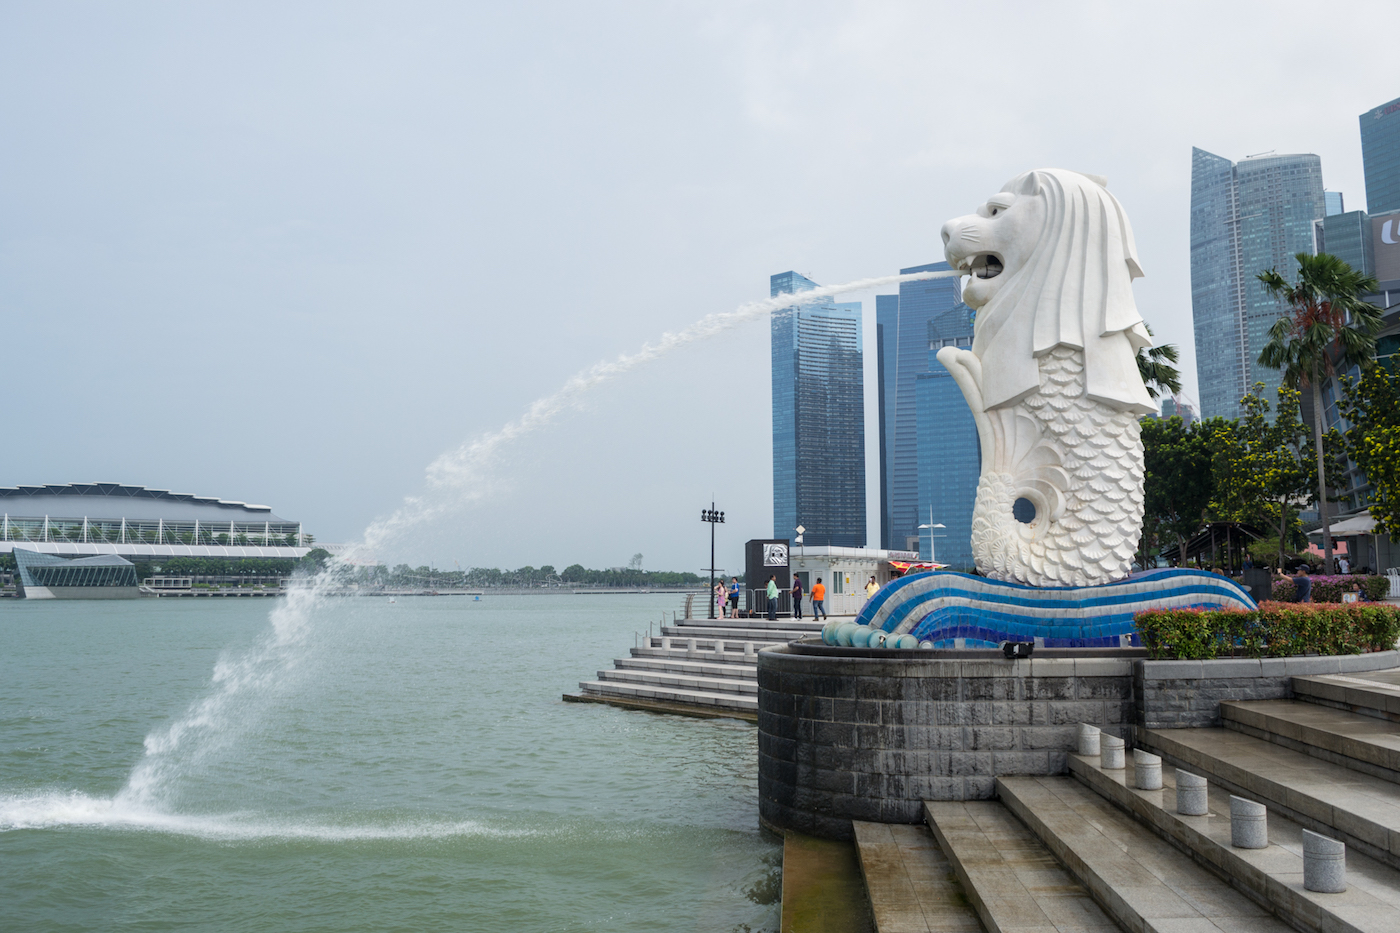 The Merlion statue by the water in Singapore.